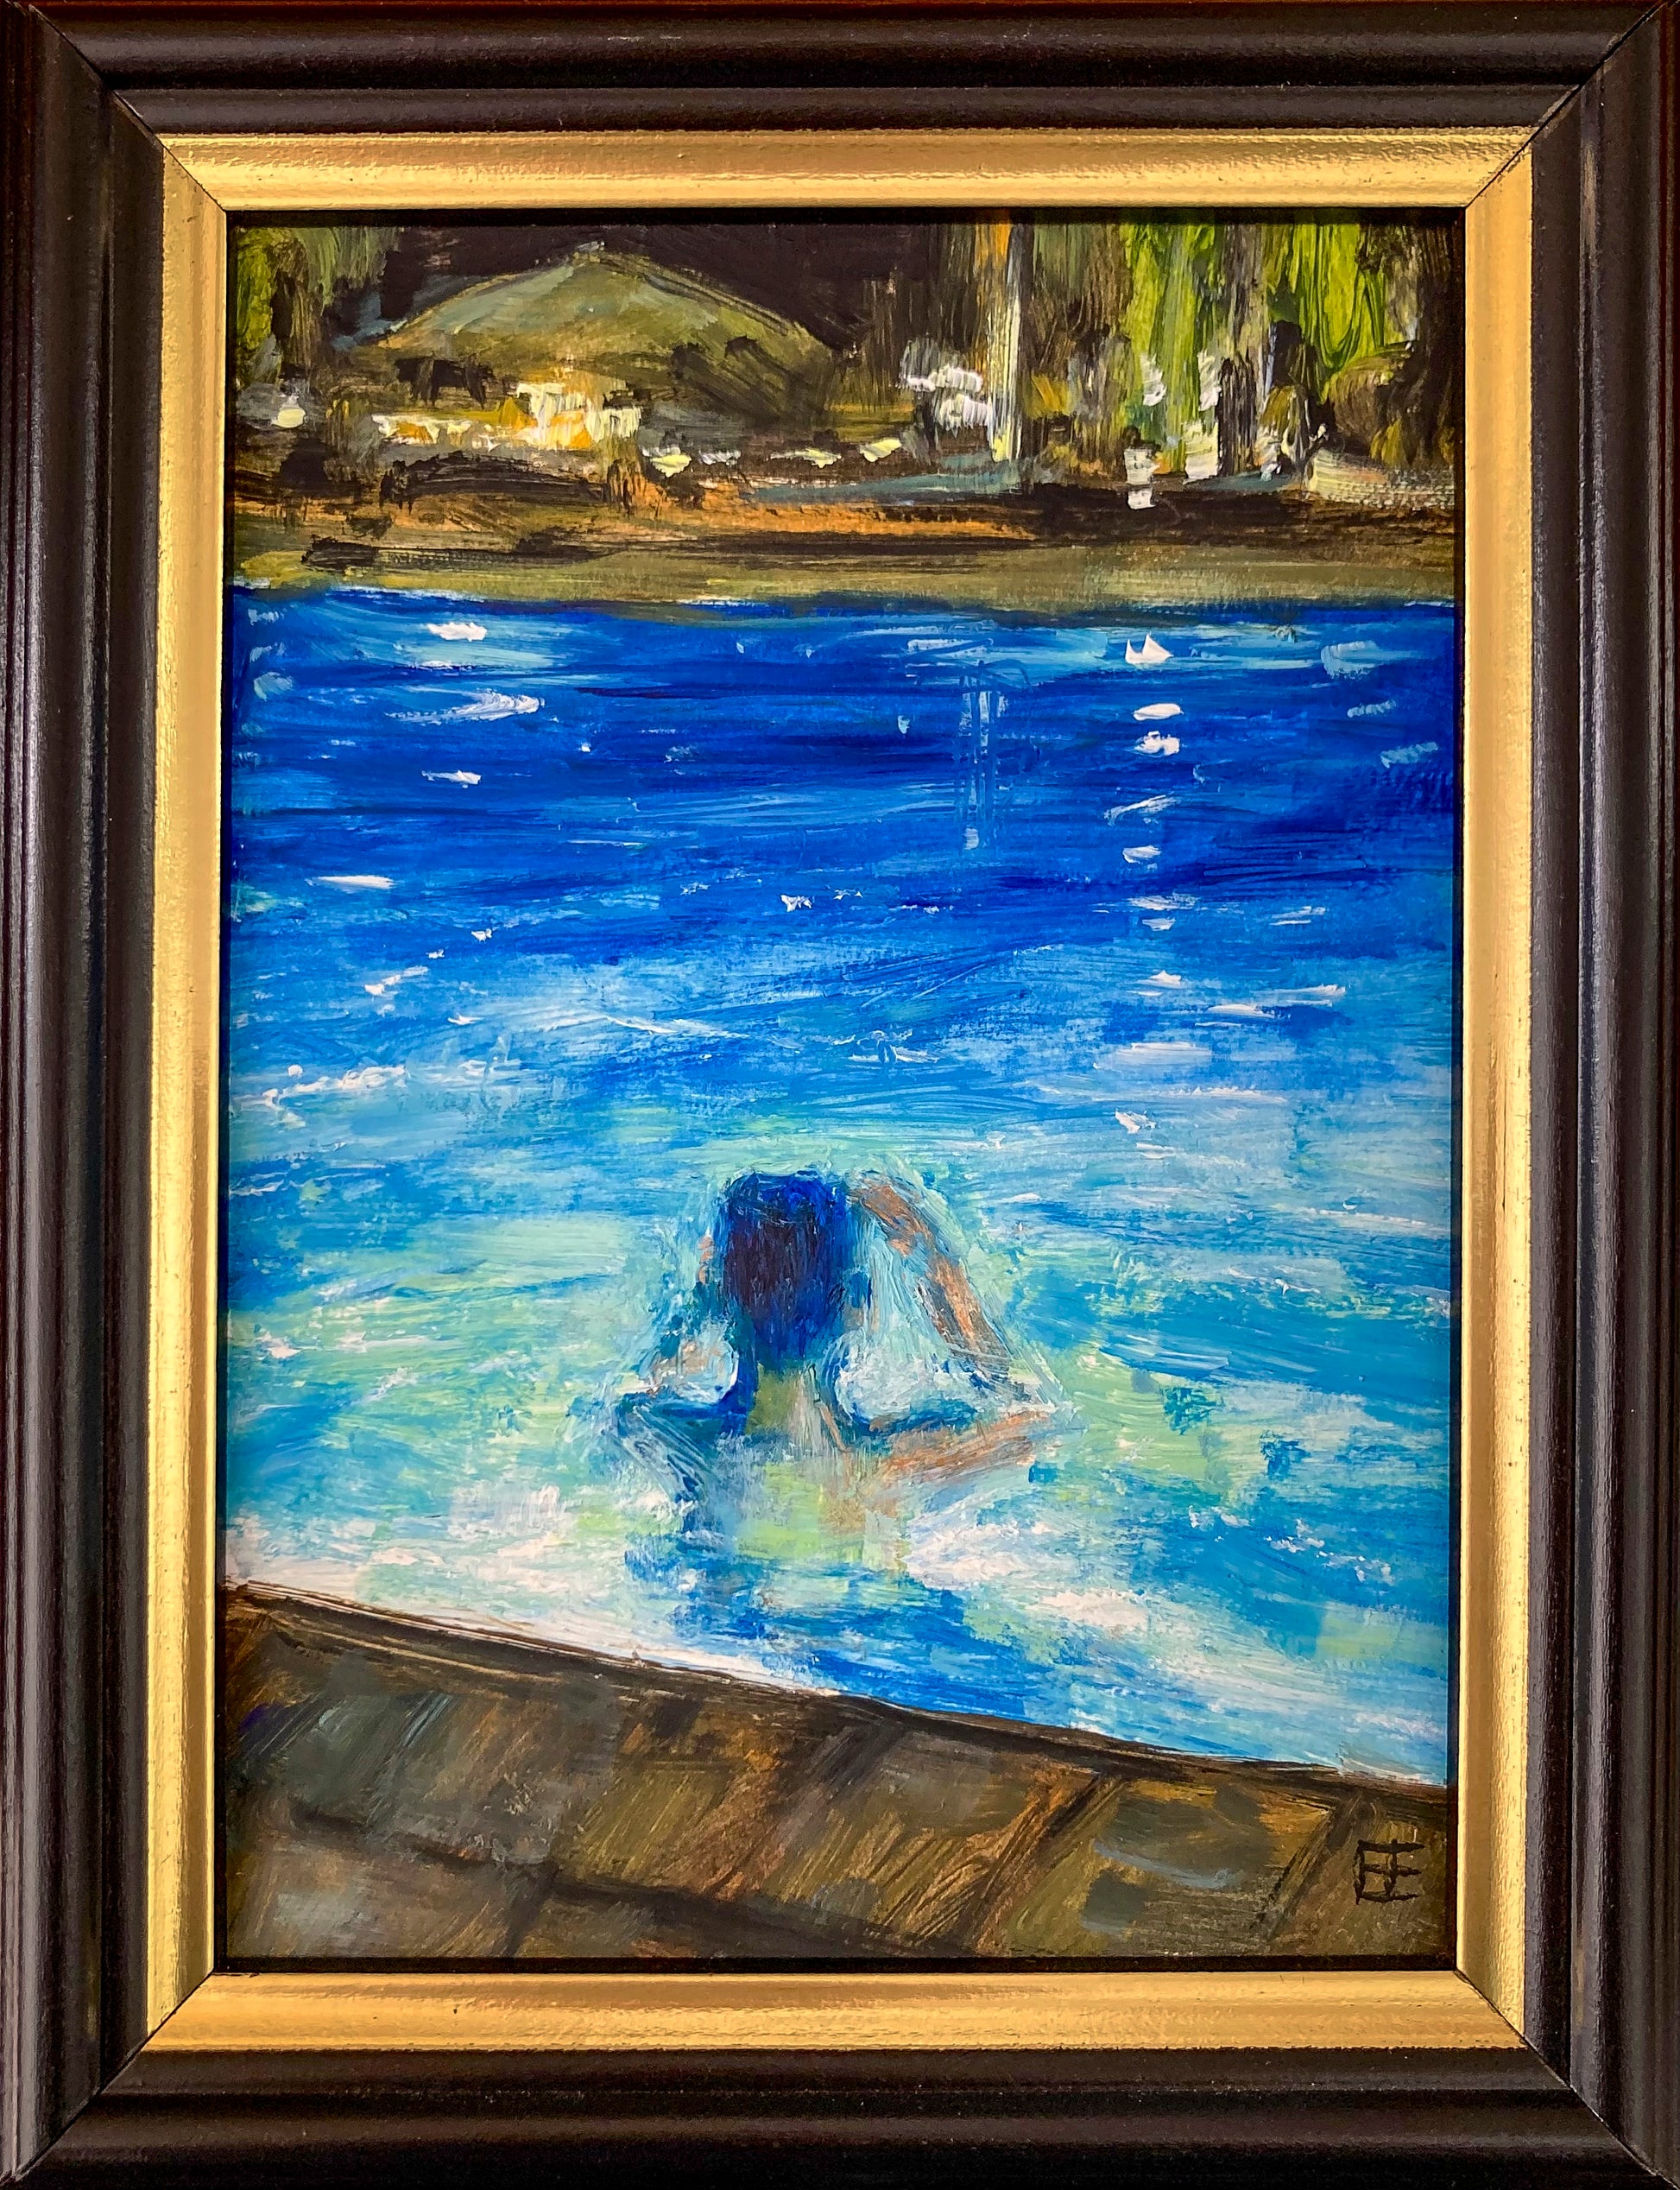 Colorful oil painting on paper; back view of person in pool at night; vibrant blues and impression of lights and umbrella in background; 5"x7" image with dark wood frame with gold gild inlay; title - In It; artist E.E. Jacks